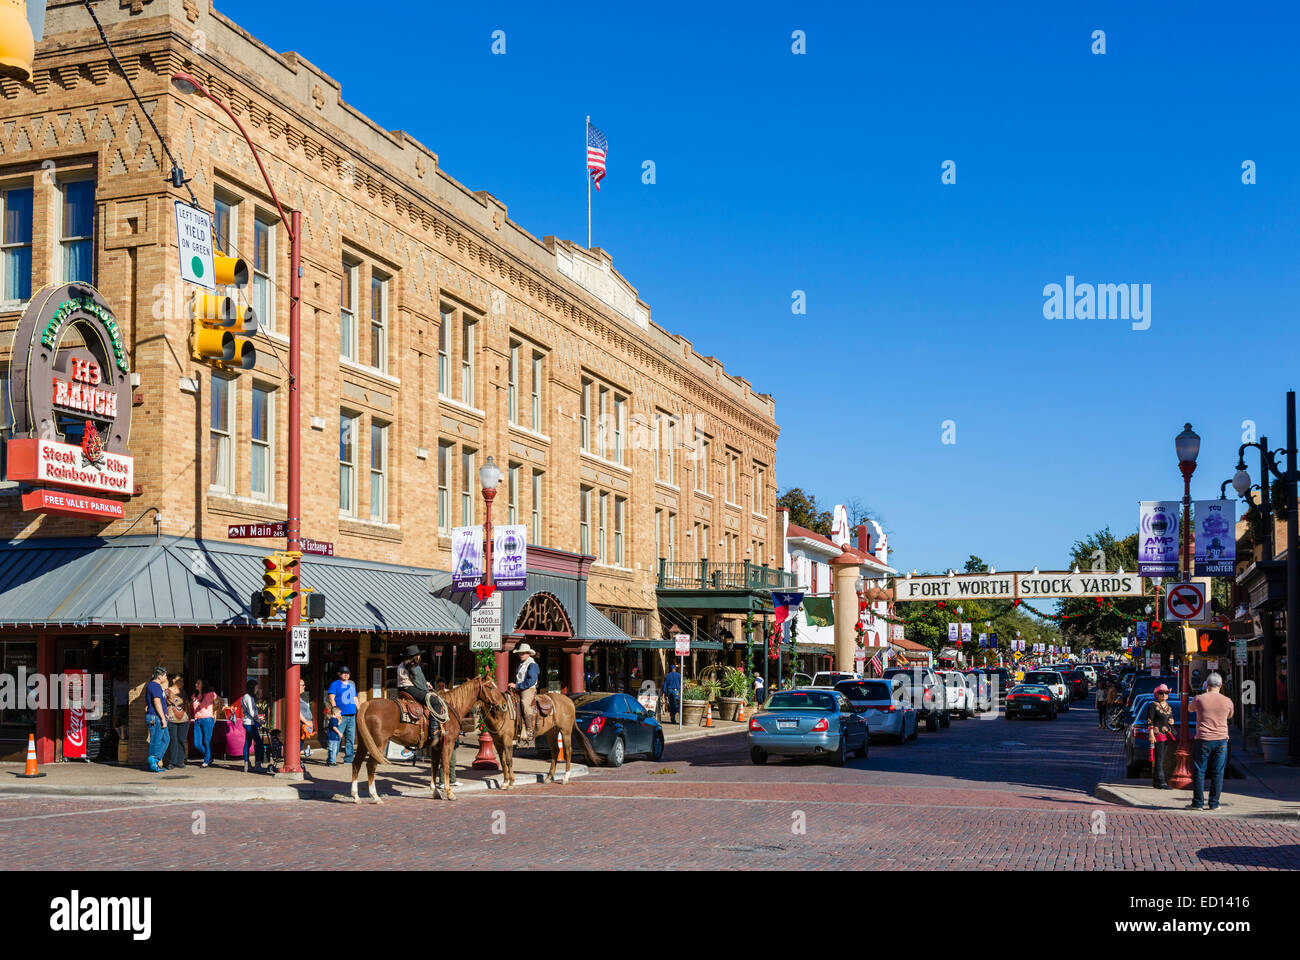 Exchange Avenue at junction with Main Street with Stockyards Hotel to the left, Stockyards District,  Fort Worth, Texas, USA Stock Photo